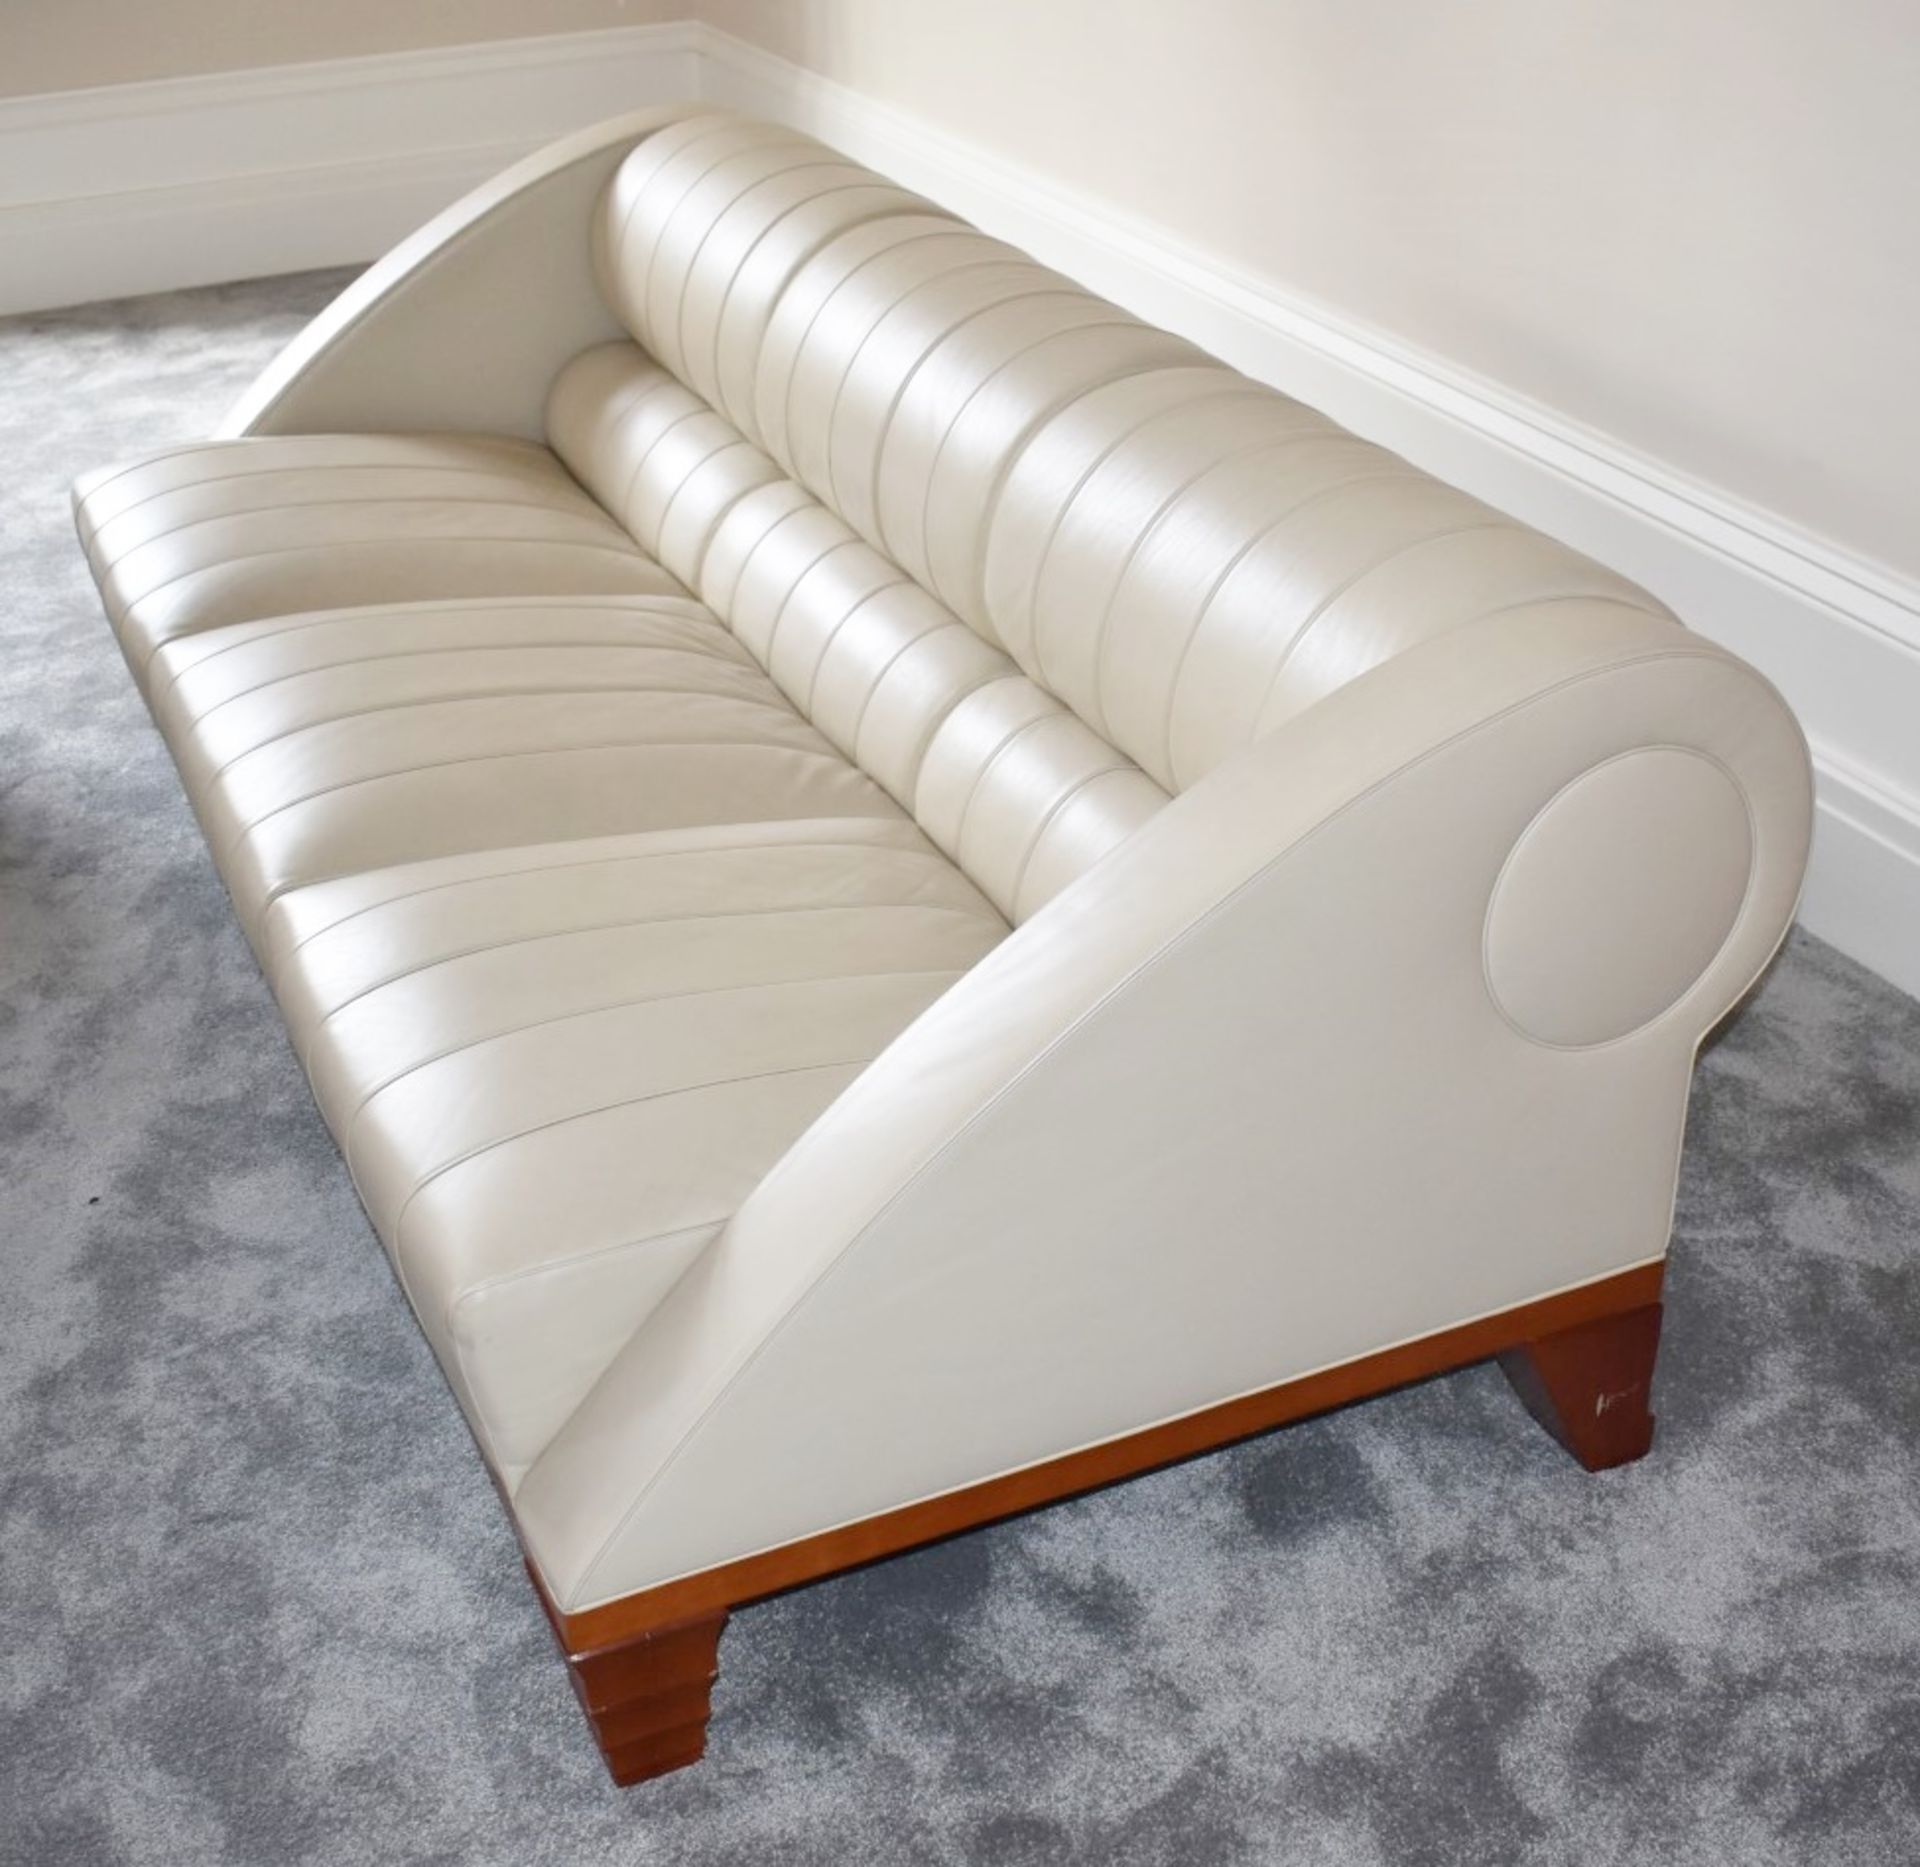 1 x Giorgetti Aries Three Seater Leather Sofa - Designed by Leon Krier - Contemporary Sofa - Image 2 of 10